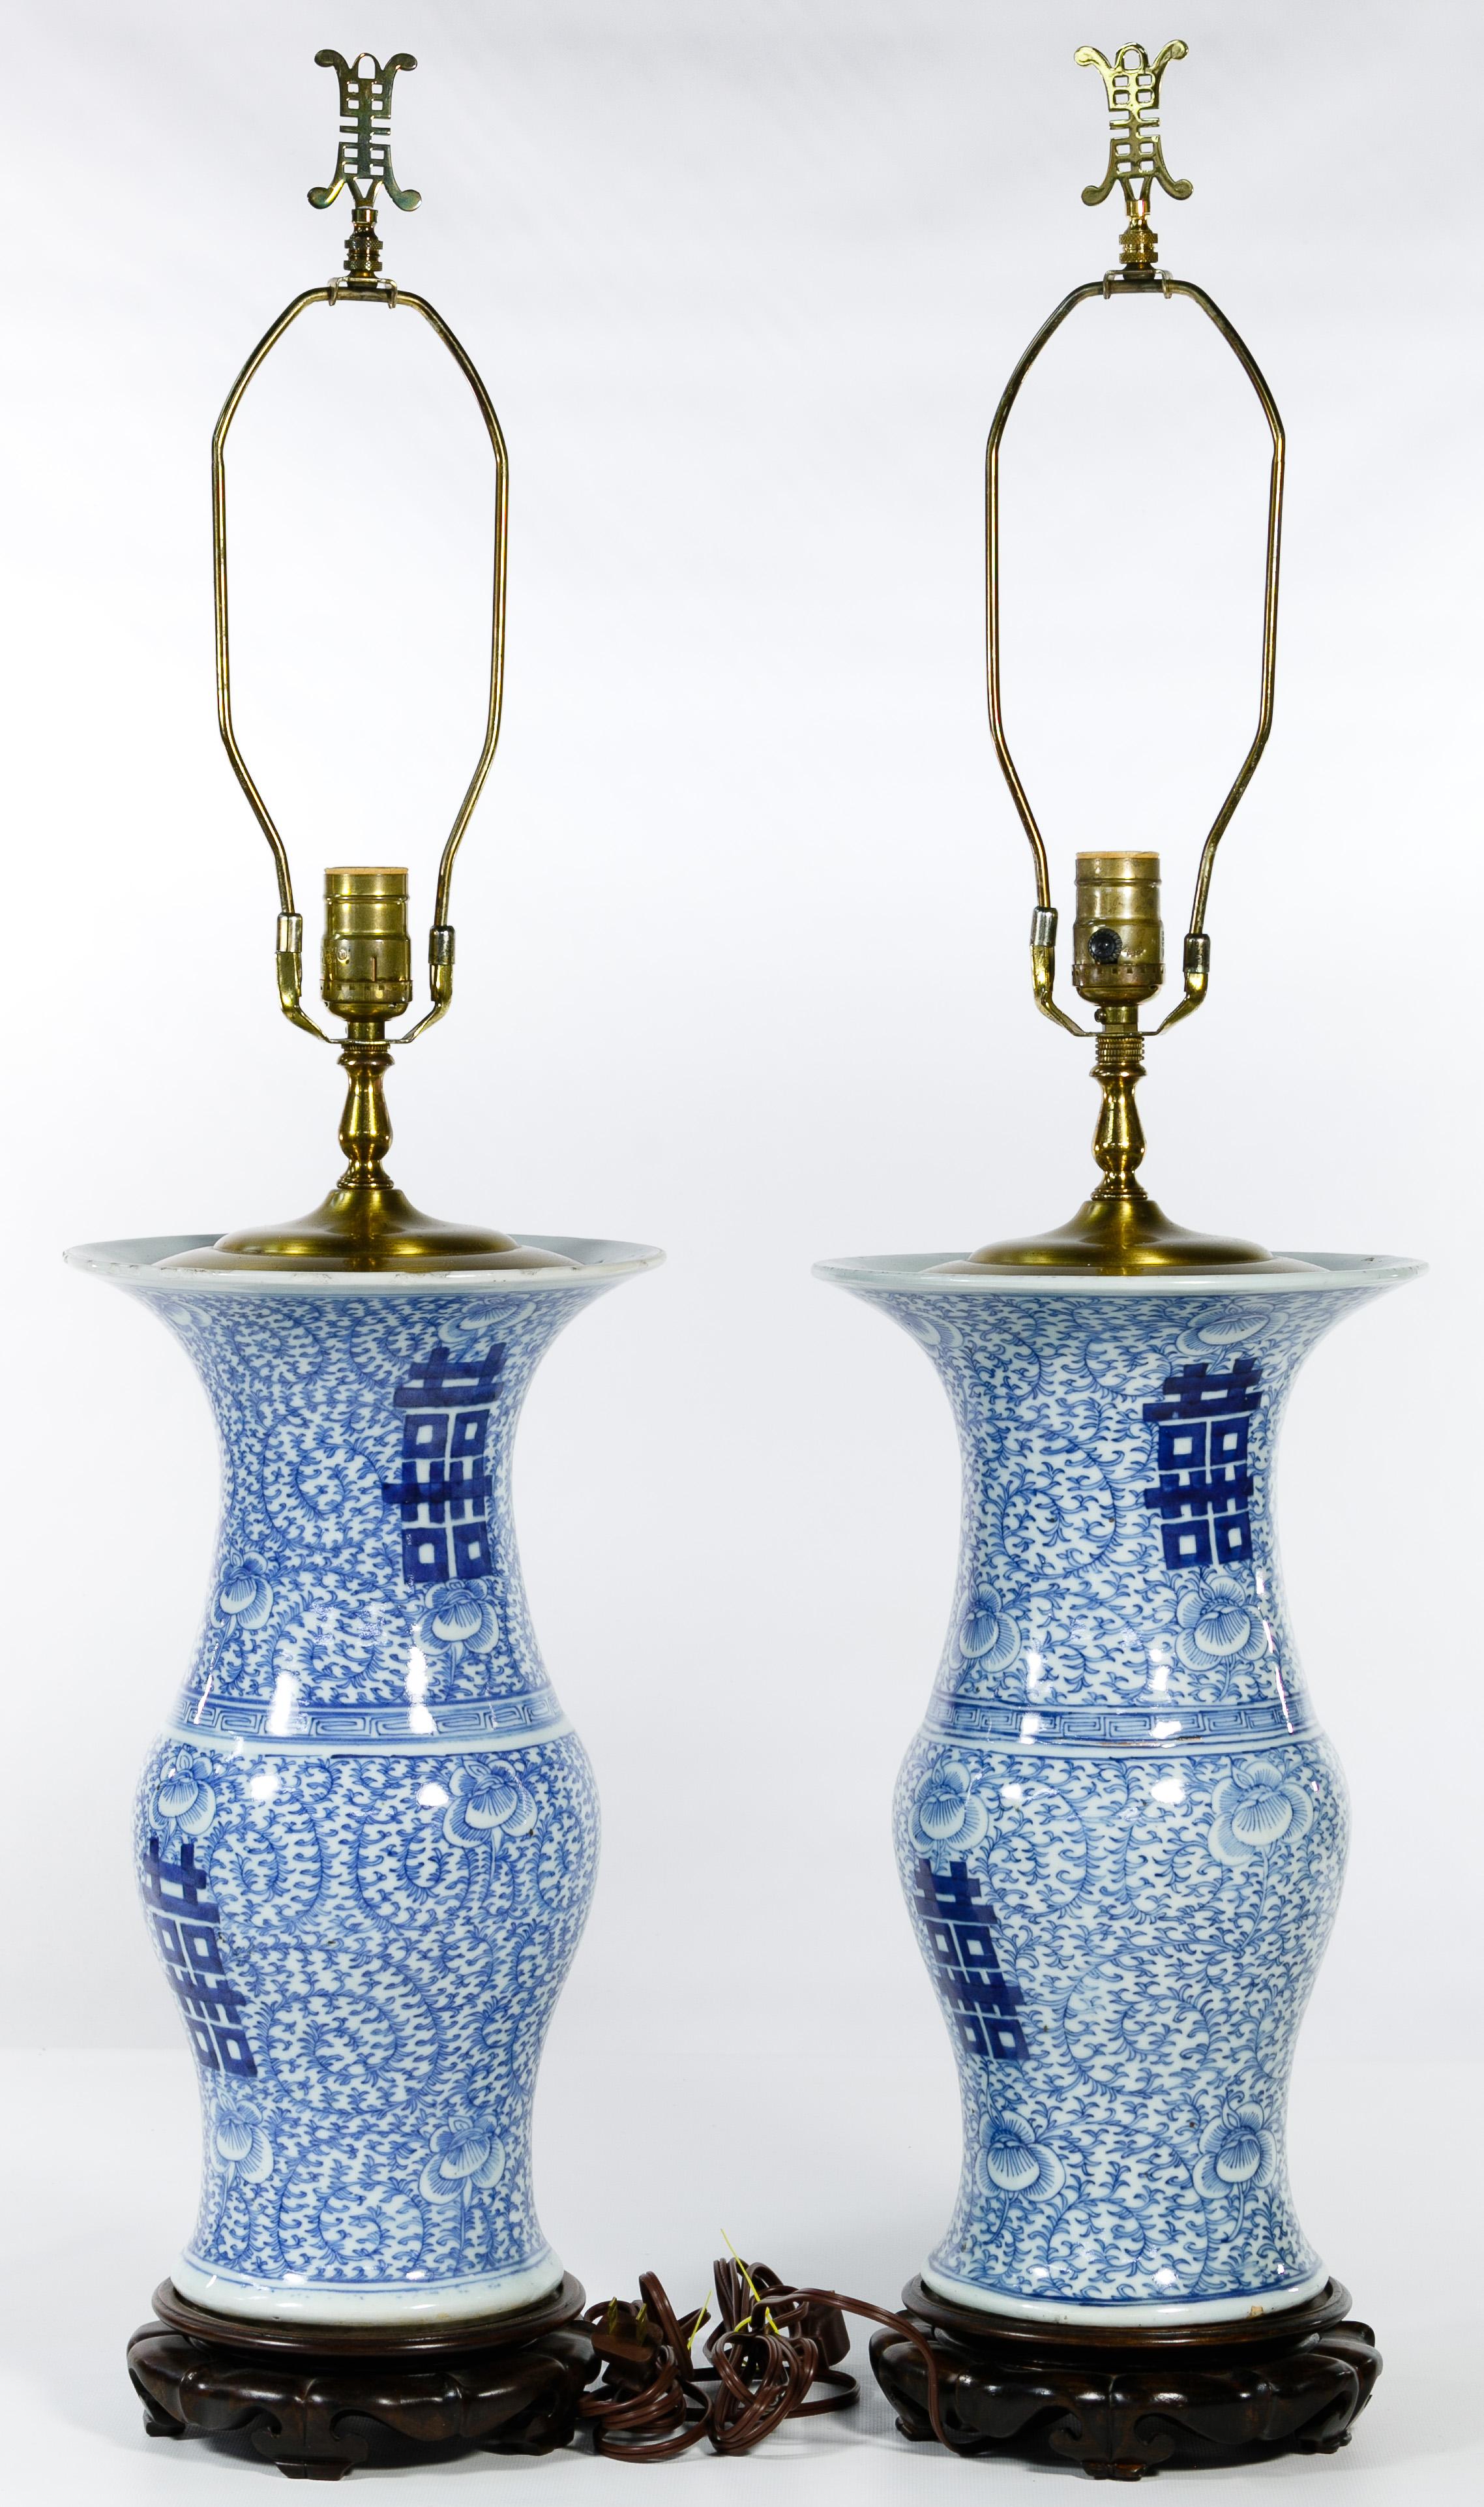 A Pair of Chinese Blue and White Table Lamps "Phoenix Tail" or "Yen Yen" Vases